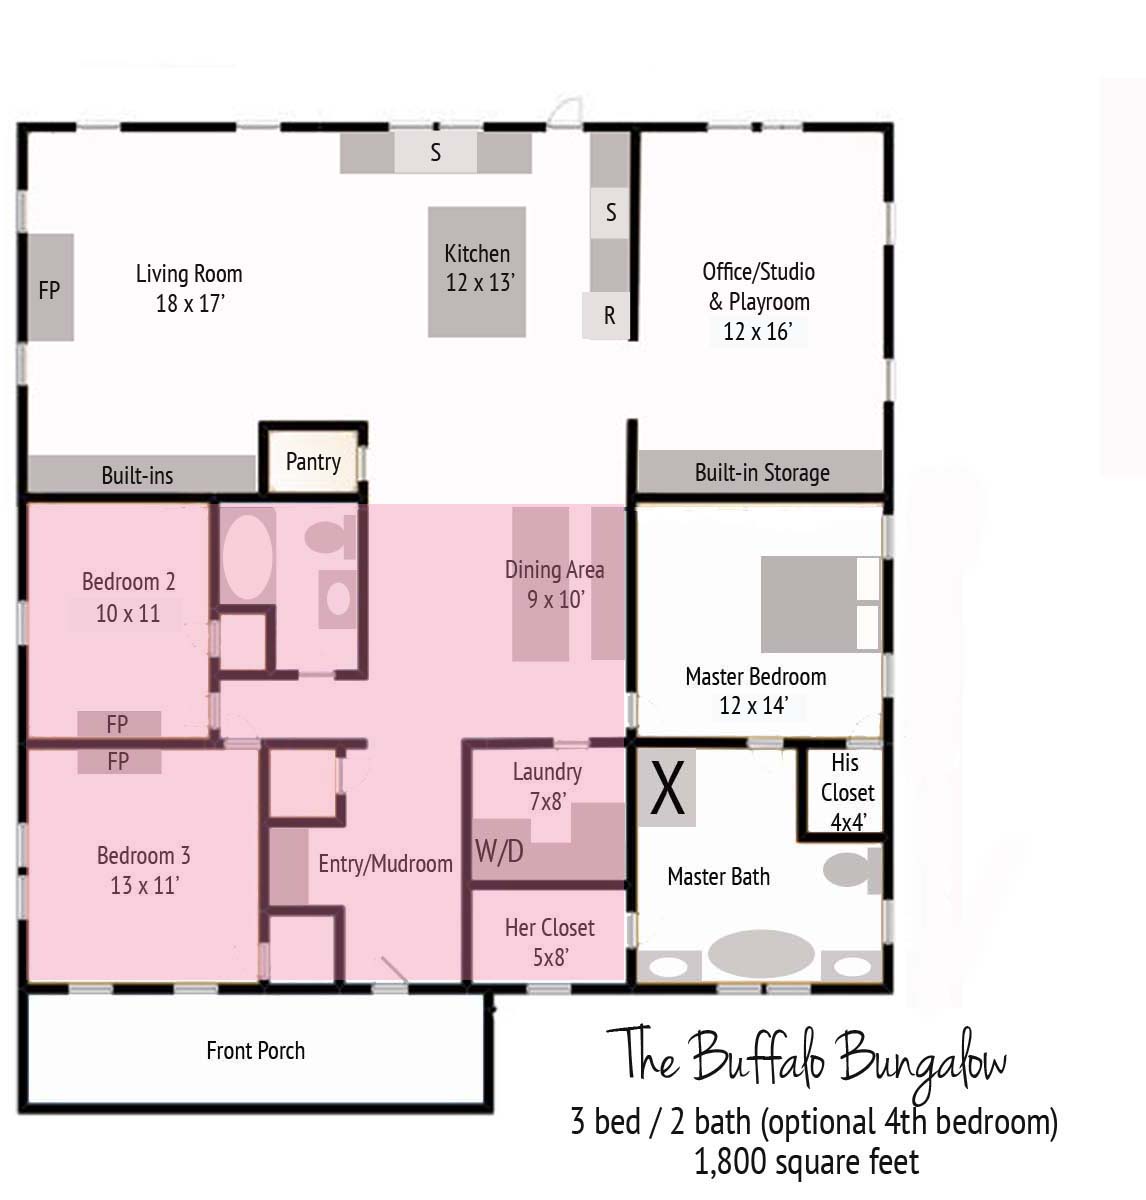 Final buffalo bungalow floor plan with existing house